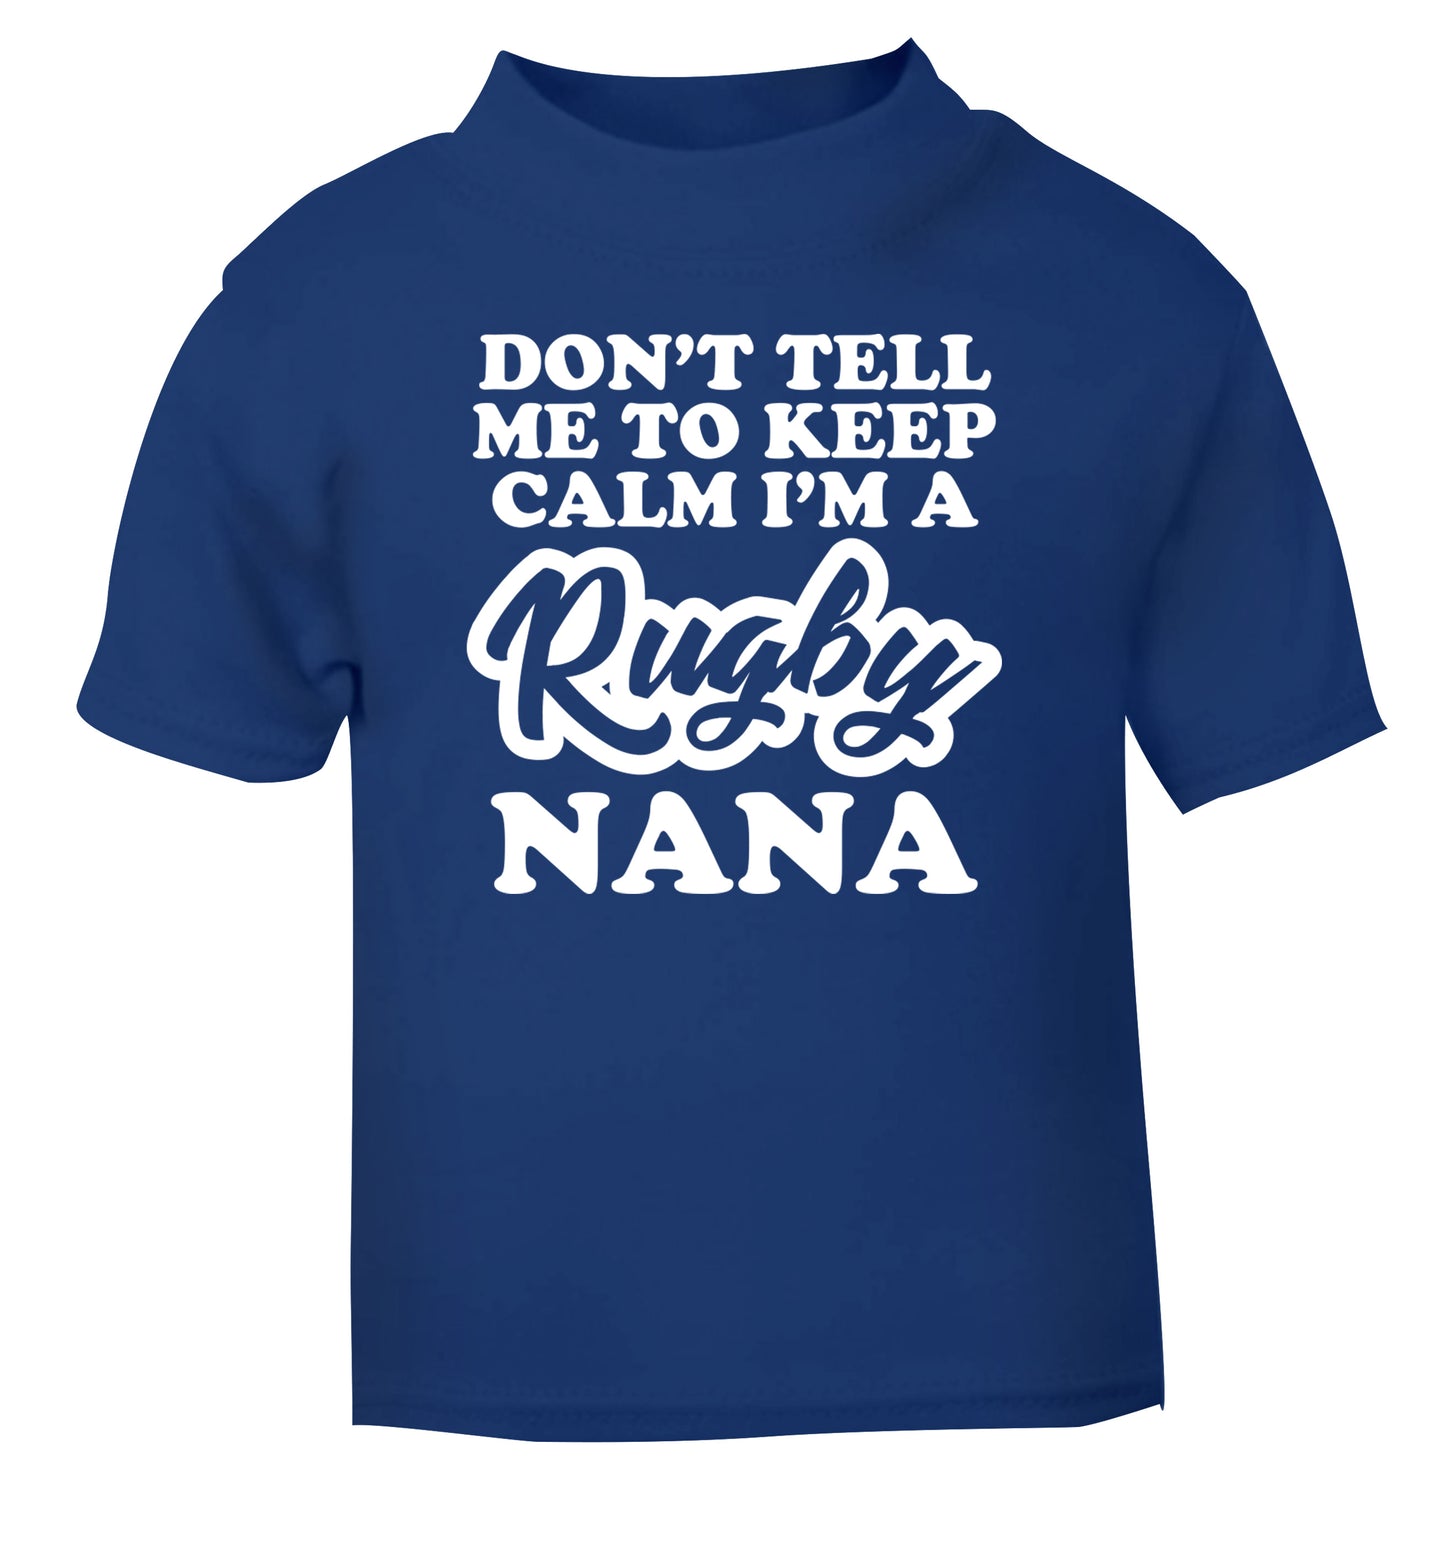 Don't tell me to keep calm I'm a rugby nana blue Baby Toddler Tshirt 2 Years